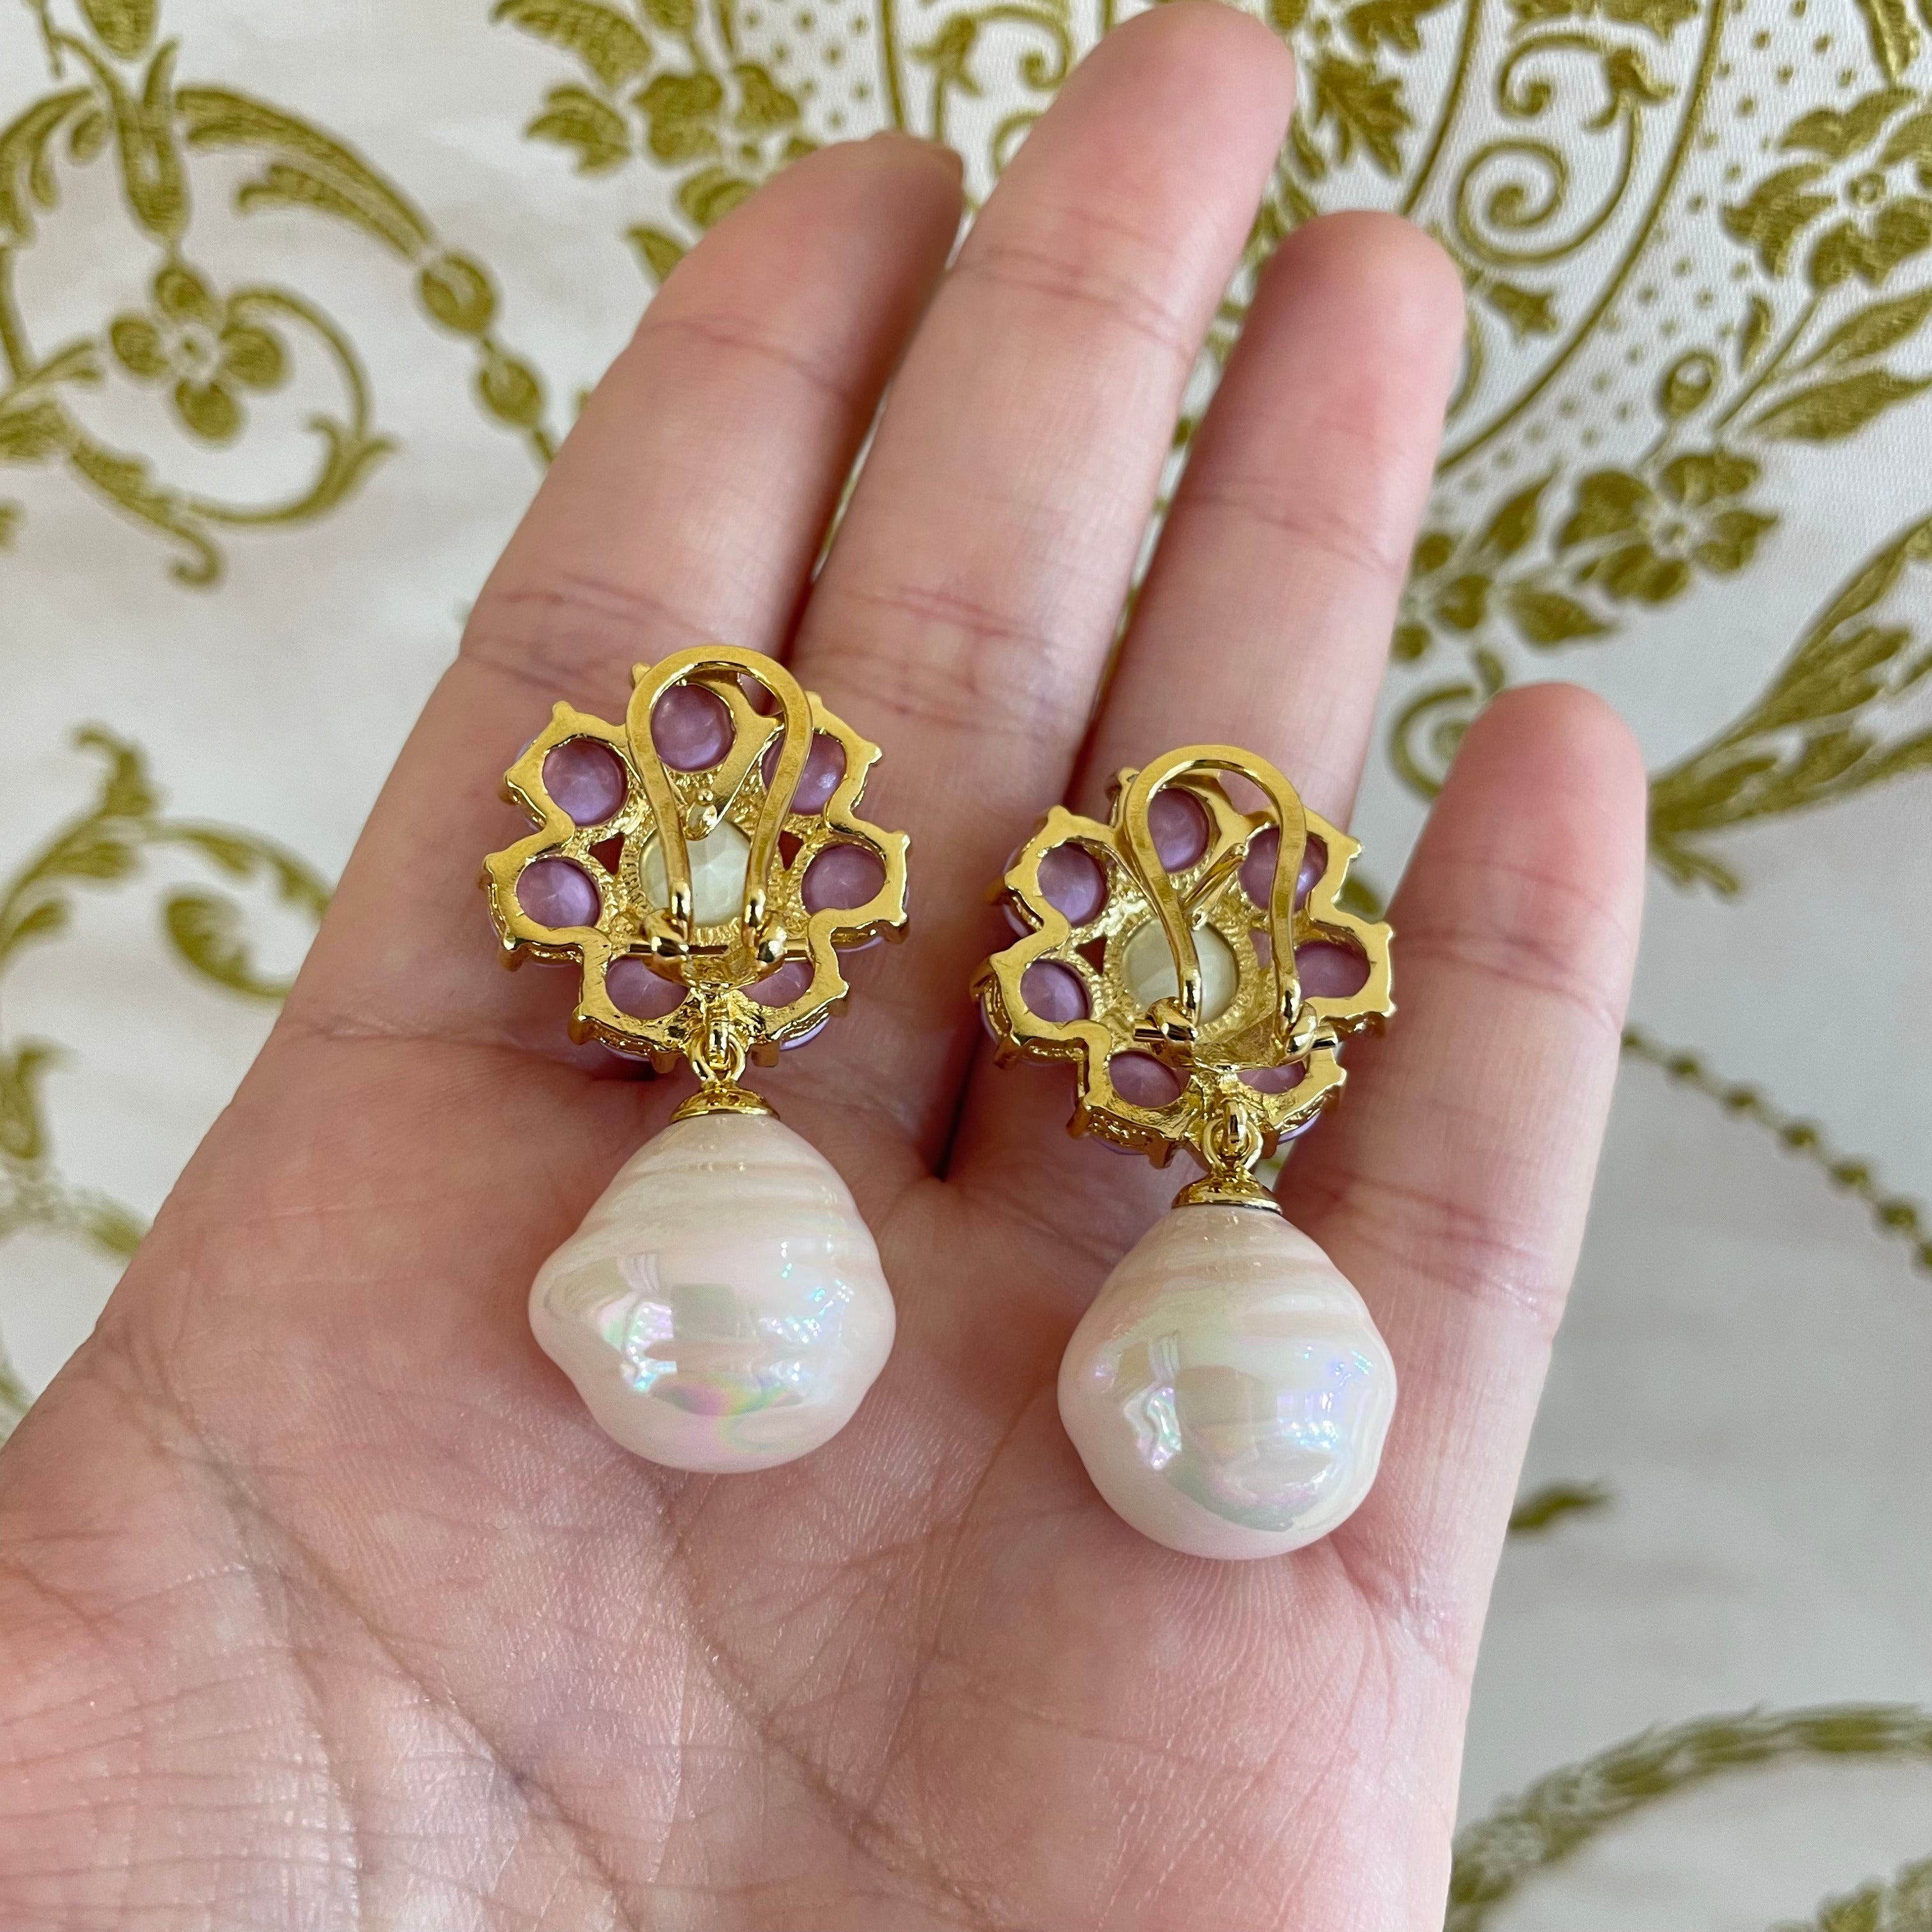 Mallorca pearls with Swarovski crystals earrings